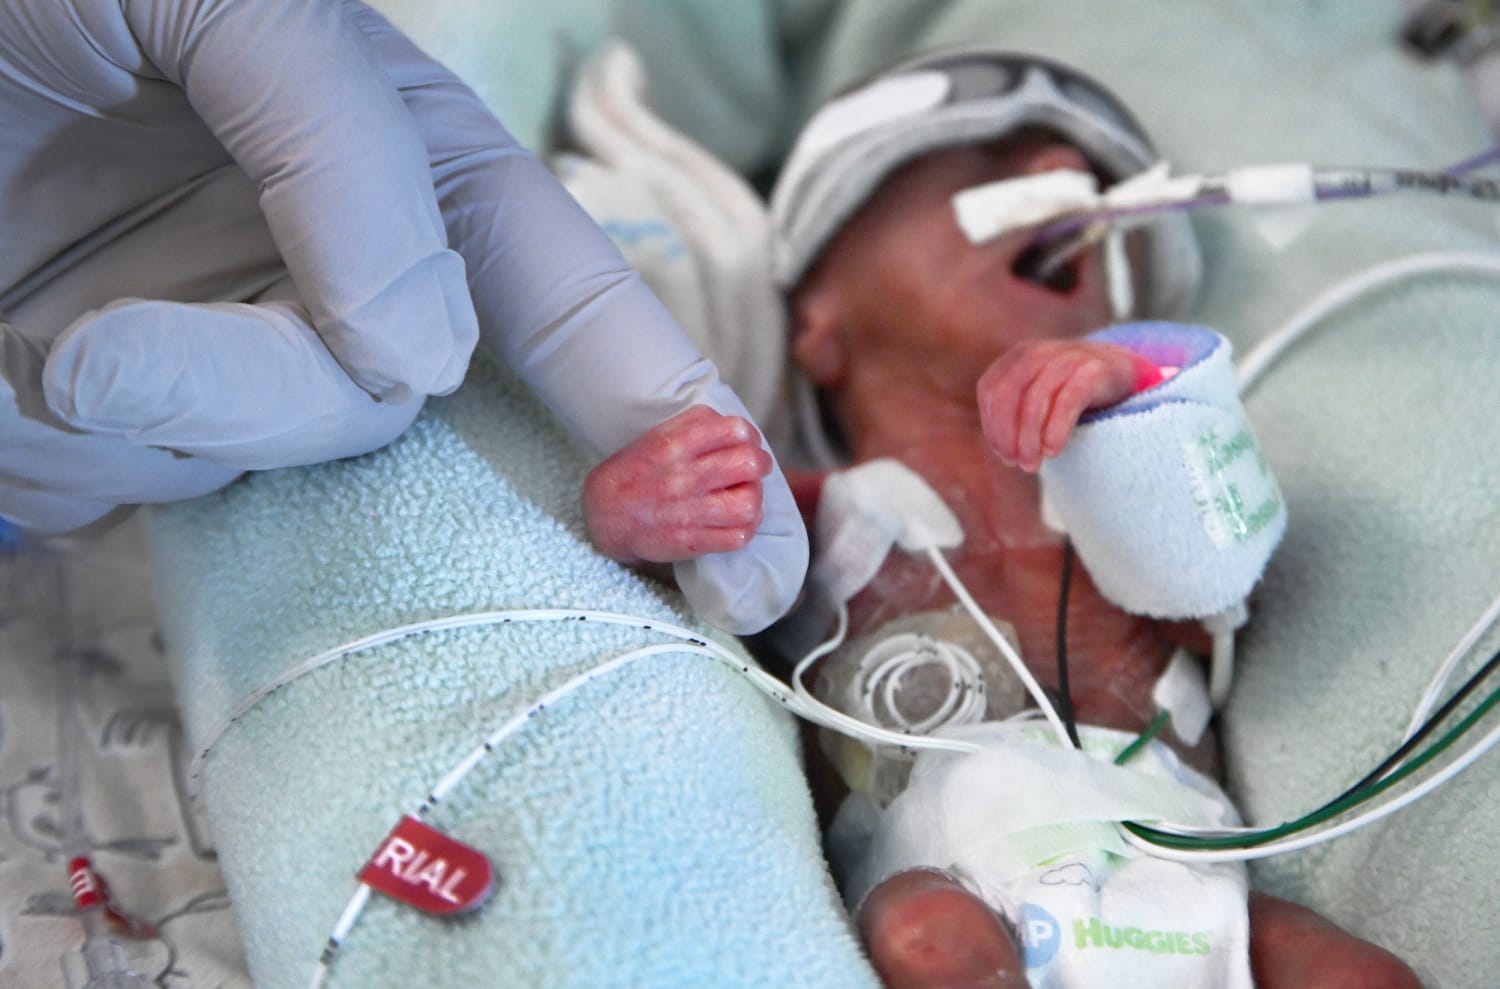 Premature births at an all-time high in the U.S., March of Dimes report finds